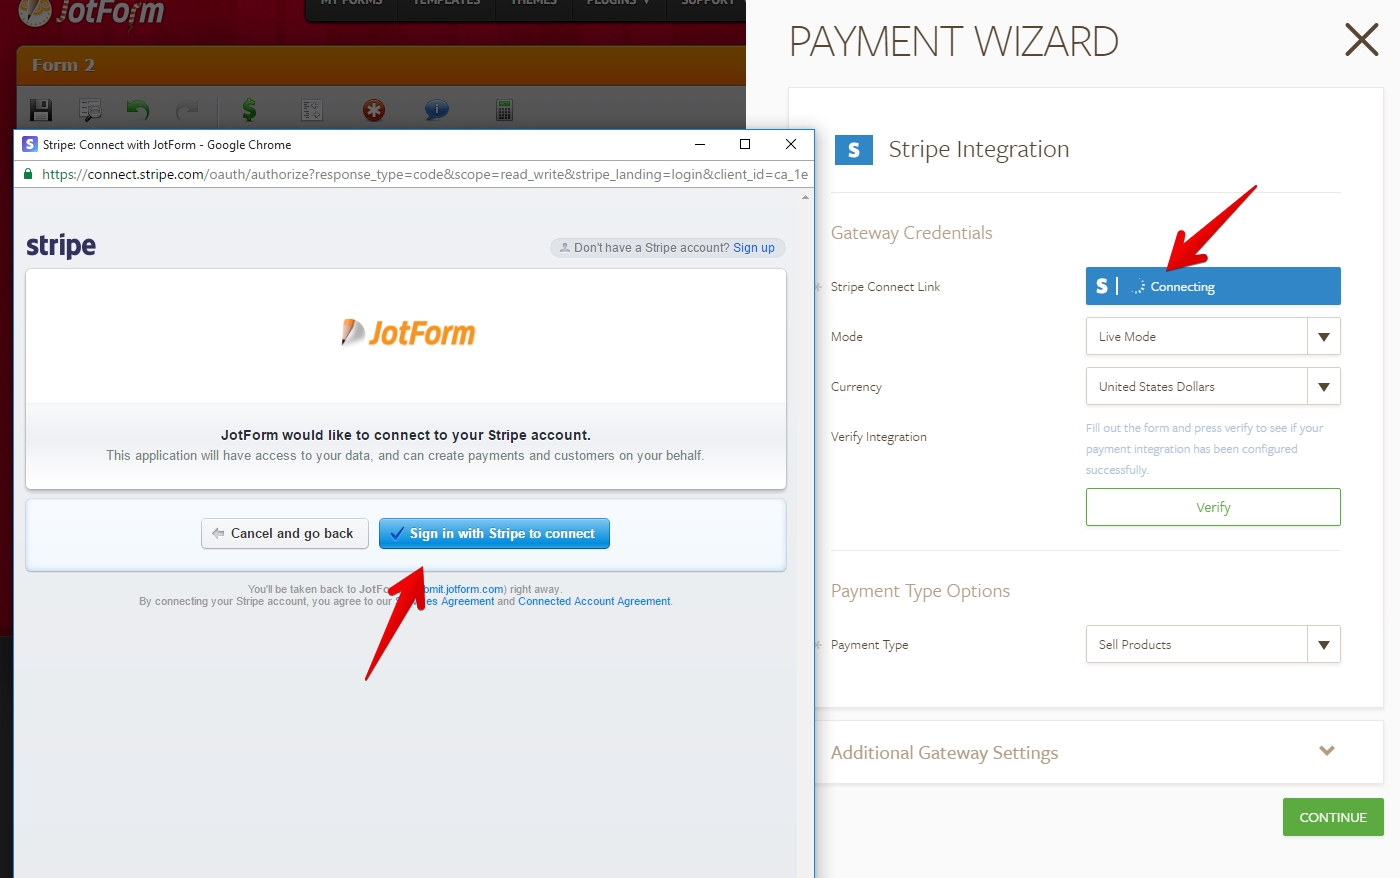 Unable to connect to stripe account with stripe payment integration Image 2 Screenshot 51